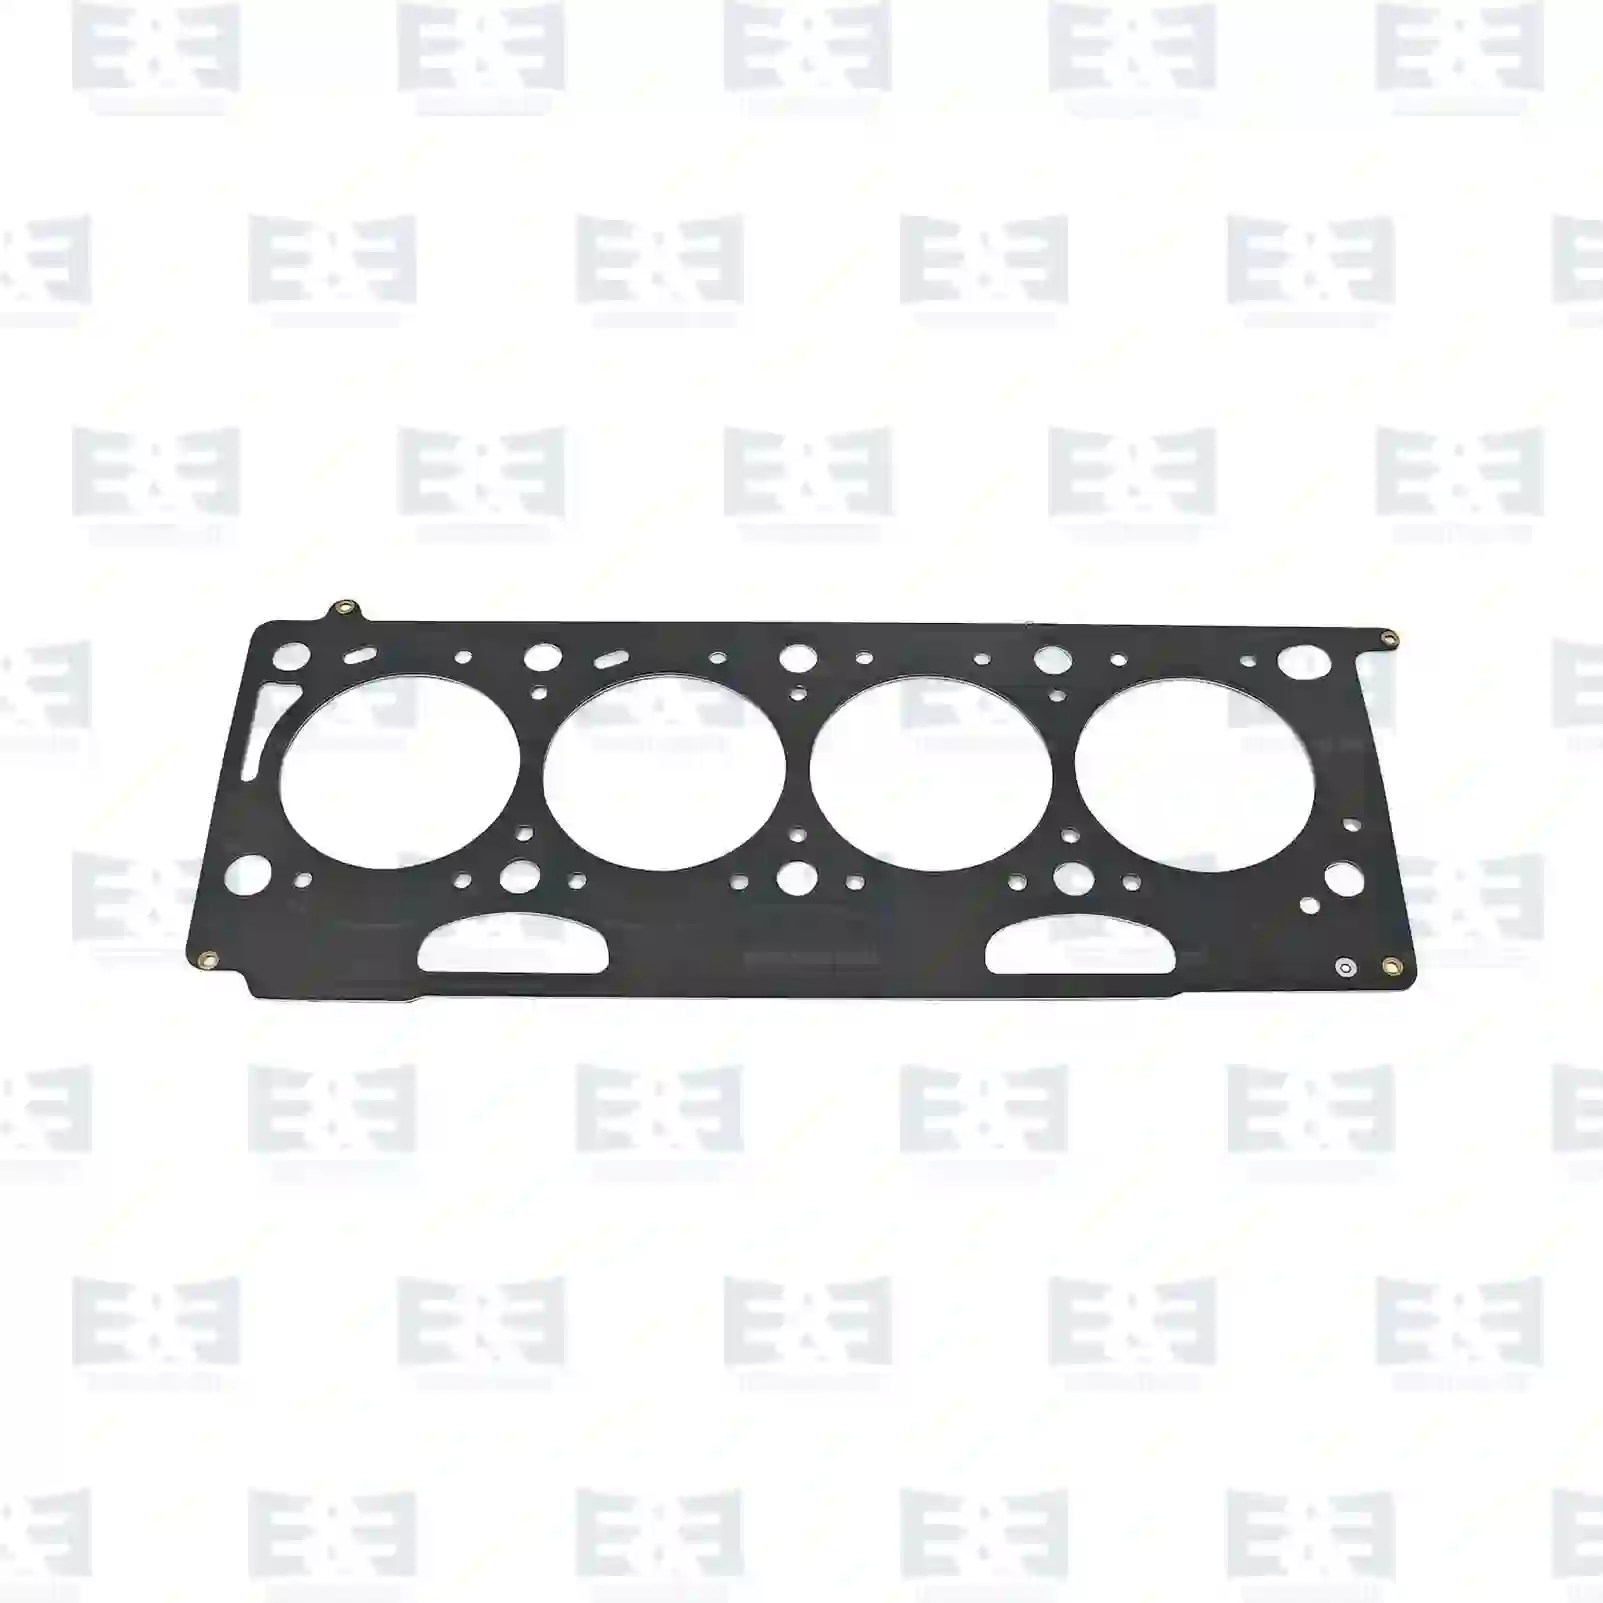 Cylinder head gasket, 2E2209449, 93161274, 8200486469, MW3020669, MW30620669, 11044-AW300, 11044-AW301, 4408100, 4413810, 7700115822, 8200264378, 8200264738, 8200375514, 8200395368, 8200486469, 8200738784, 8200780116, 8200956481, 11141-67JG2, 30620669, 30652249, 30652289, 30662344, 30750749, 31216523 ||  2E2209449 E&E Truck Spare Parts | Truck Spare Parts, Auotomotive Spare Parts Cylinder head gasket, 2E2209449, 93161274, 8200486469, MW3020669, MW30620669, 11044-AW300, 11044-AW301, 4408100, 4413810, 7700115822, 8200264378, 8200264738, 8200375514, 8200395368, 8200486469, 8200738784, 8200780116, 8200956481, 11141-67JG2, 30620669, 30652249, 30652289, 30662344, 30750749, 31216523 ||  2E2209449 E&E Truck Spare Parts | Truck Spare Parts, Auotomotive Spare Parts